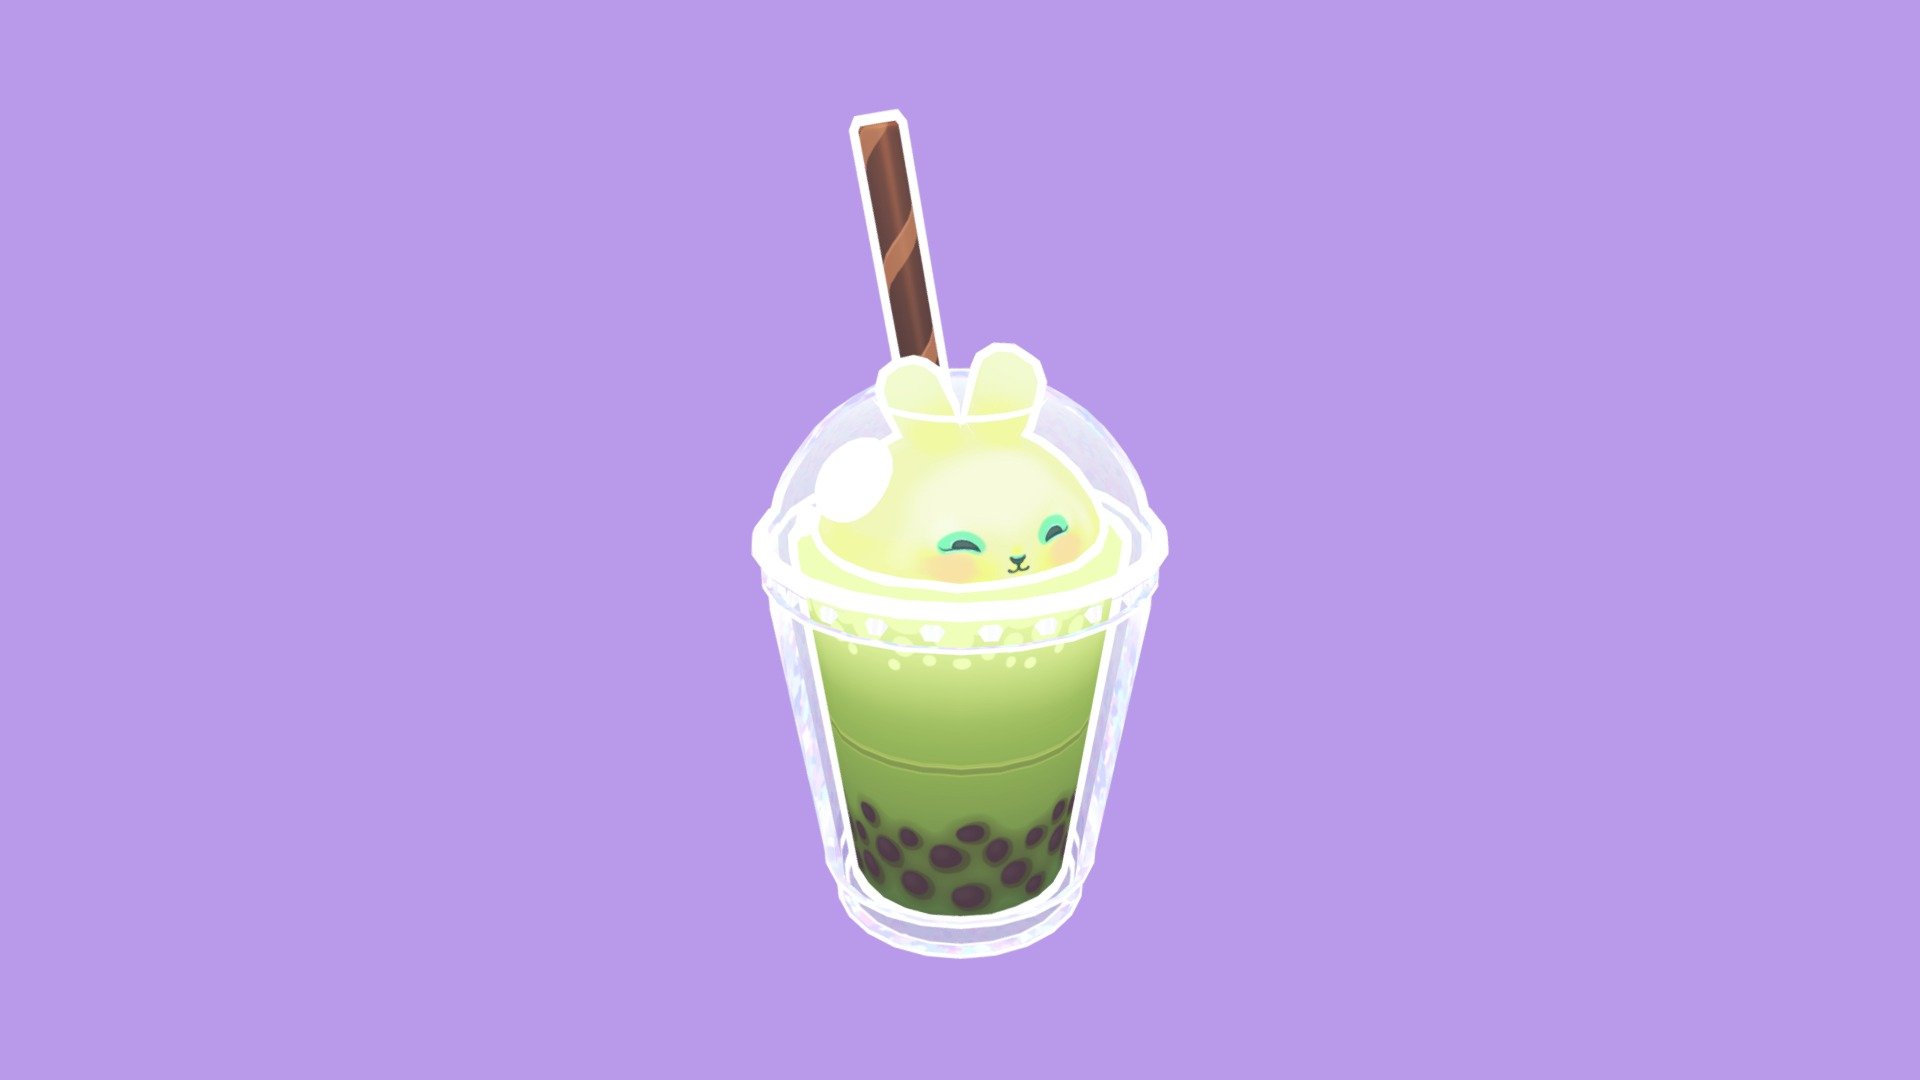 I love Matcha Bubble Tea so much that I made this! Do you love Bubble Tea? Wanna go get one with me?
Made in Maya then hand painted with Substance Painter.
https://www.artstation.com/artwork/aG6qJ9 - Cute Matcha Bubble Tea - 3D model by amber.marie.edwards 3d model